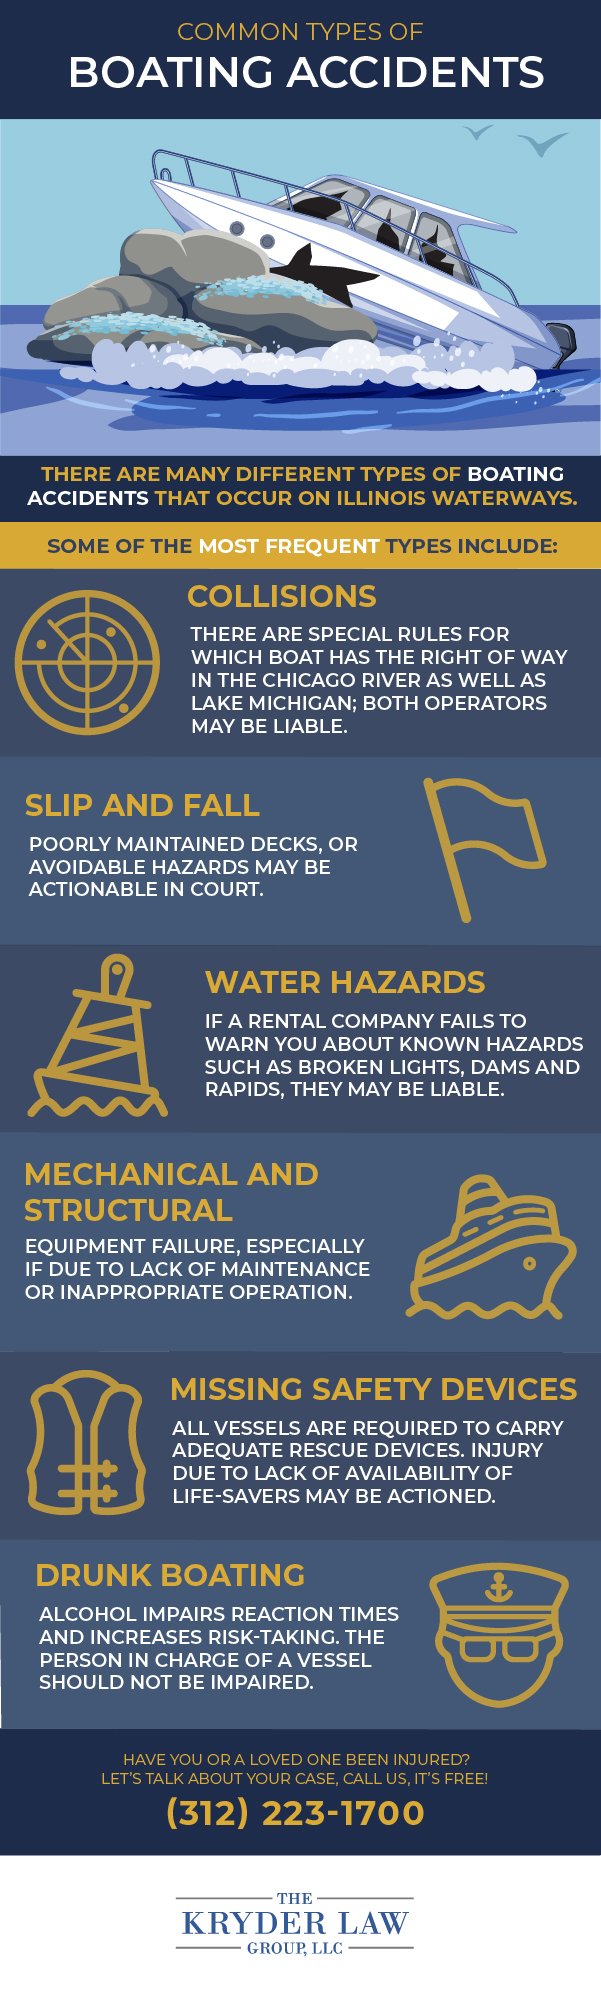 Lake Michigan Boating Accidents: Who Is Liable? Infographic